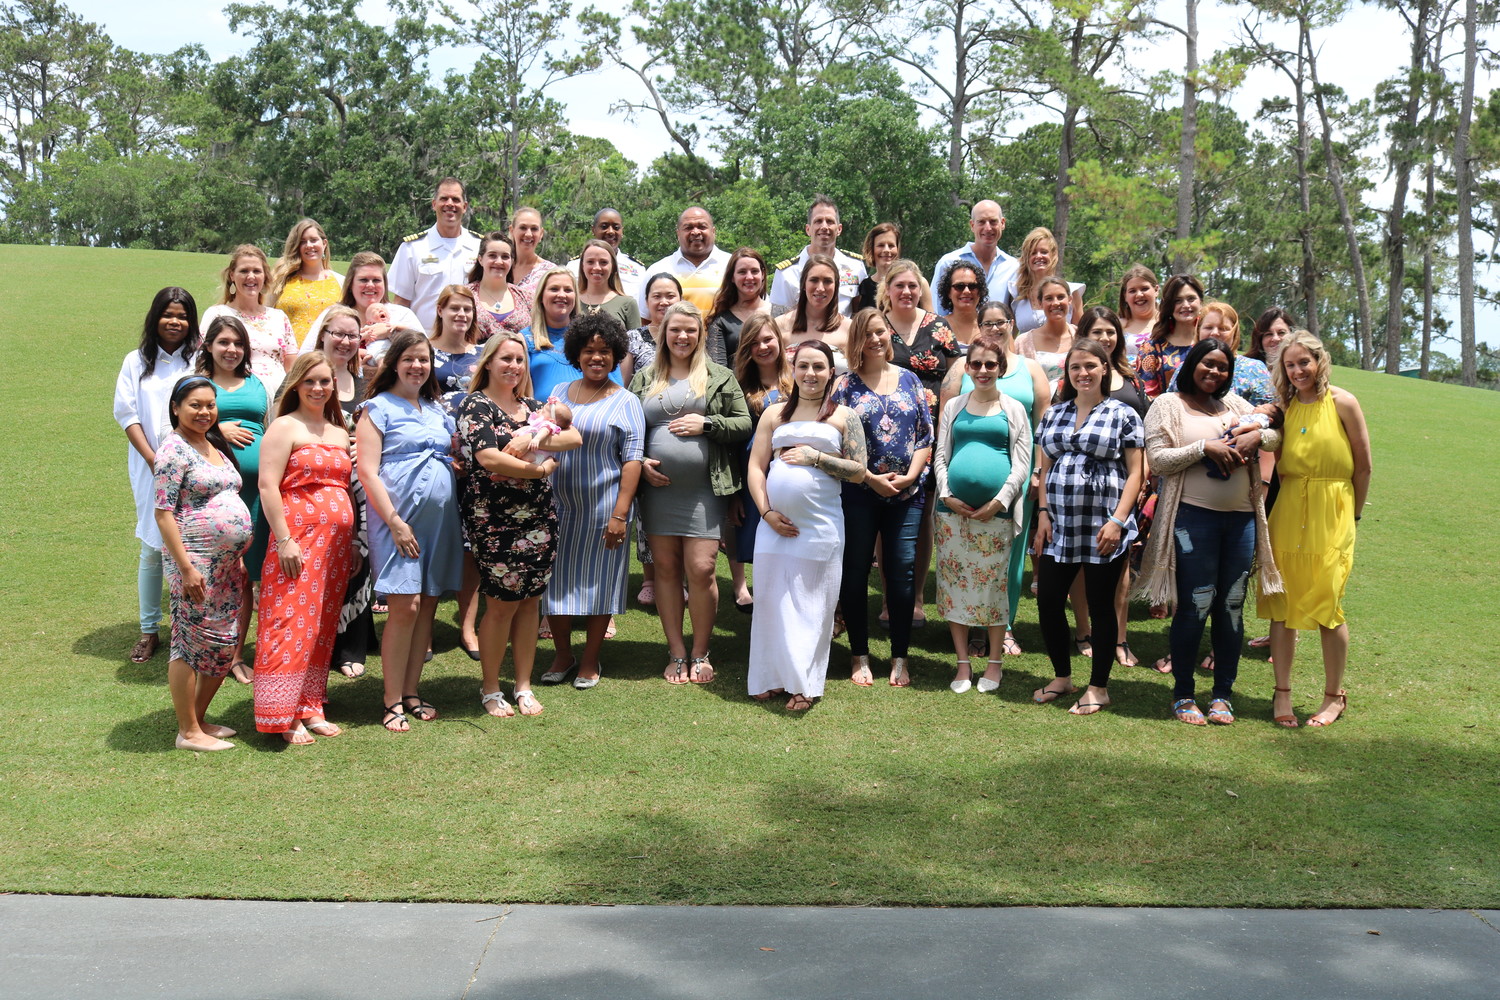 Military moms-to-be and other attendees of Operation Shower gather following a fun afternoon filled with gifts and games at TPC Sawgrass on Sunday, May 6.